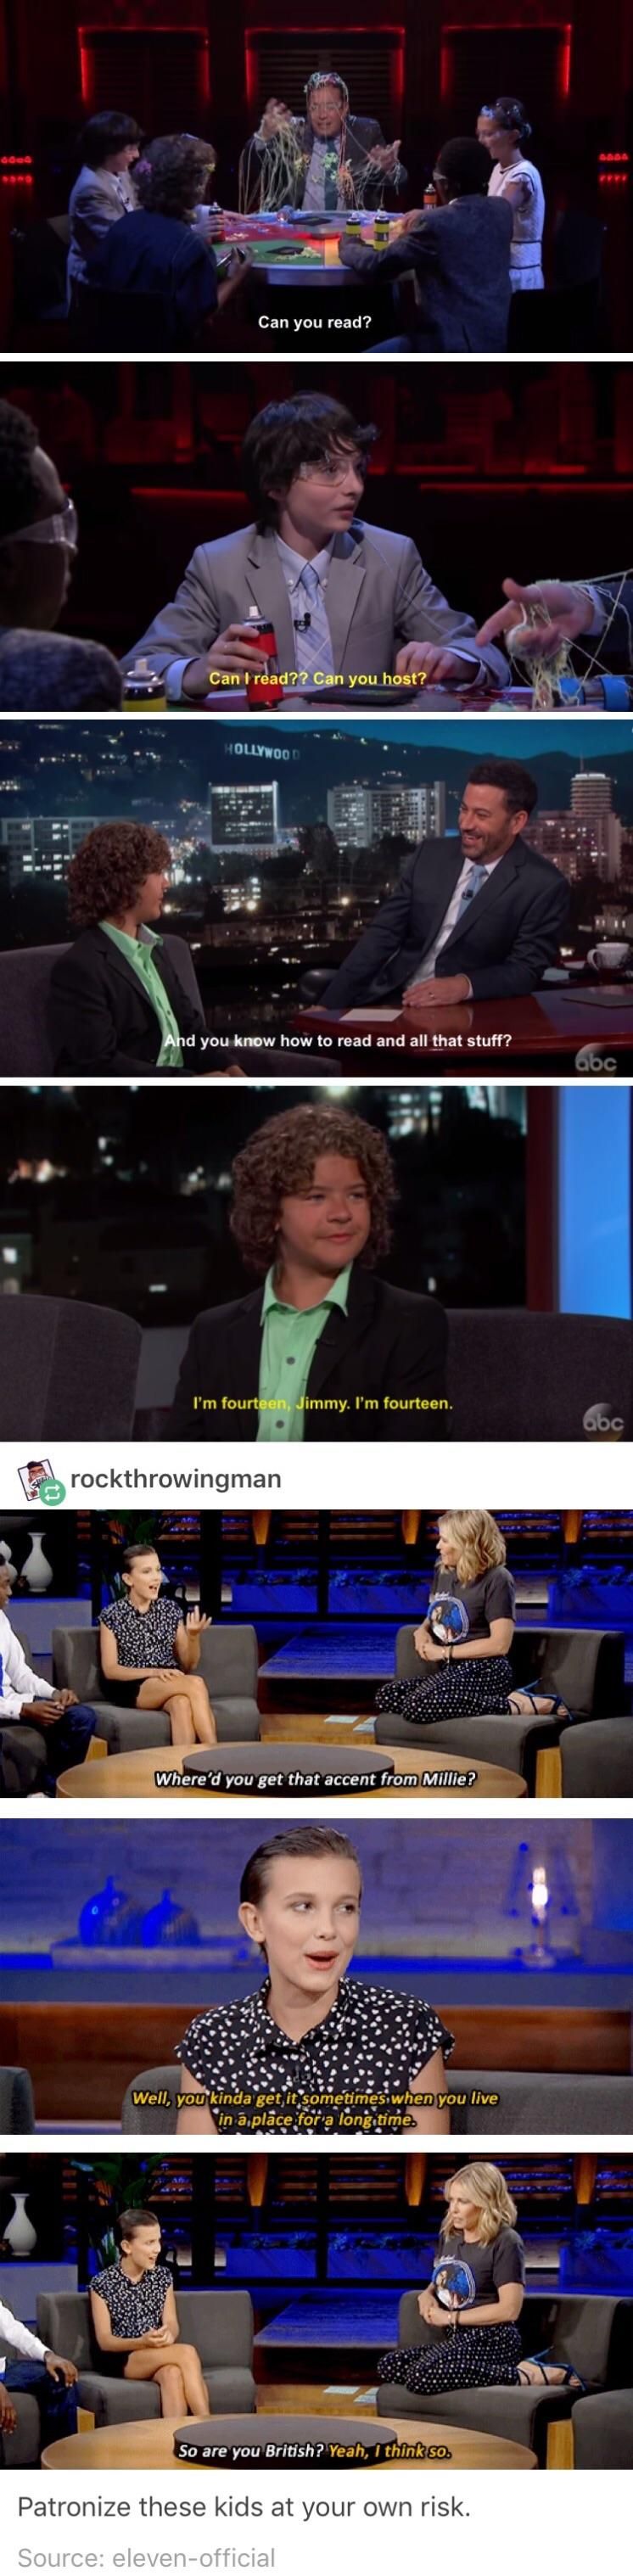 Stranger things kids seem to handle the hosts well..